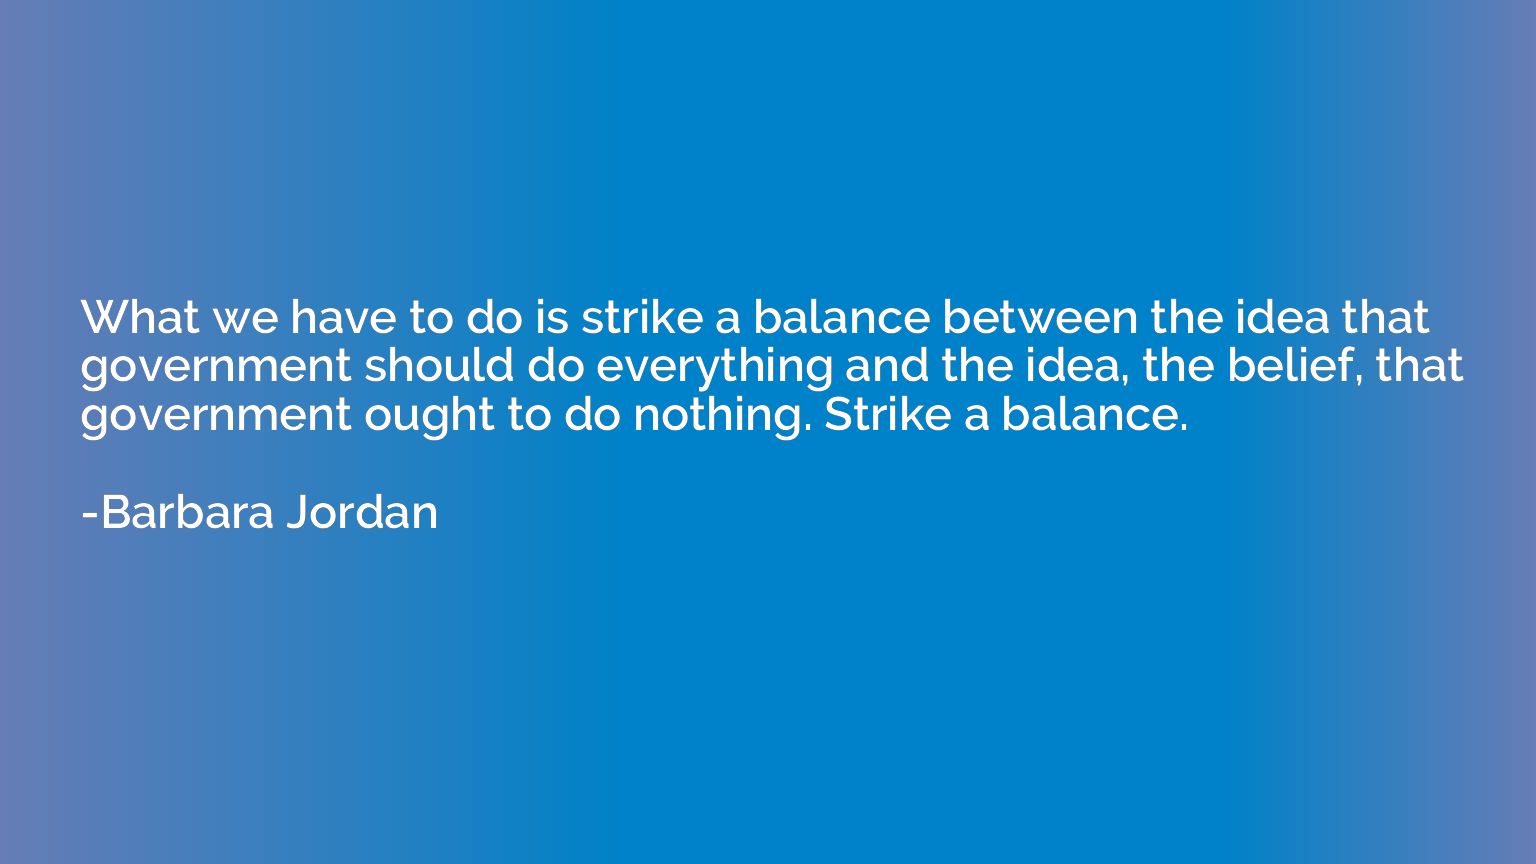 What we have to do is strike a balance between the idea that